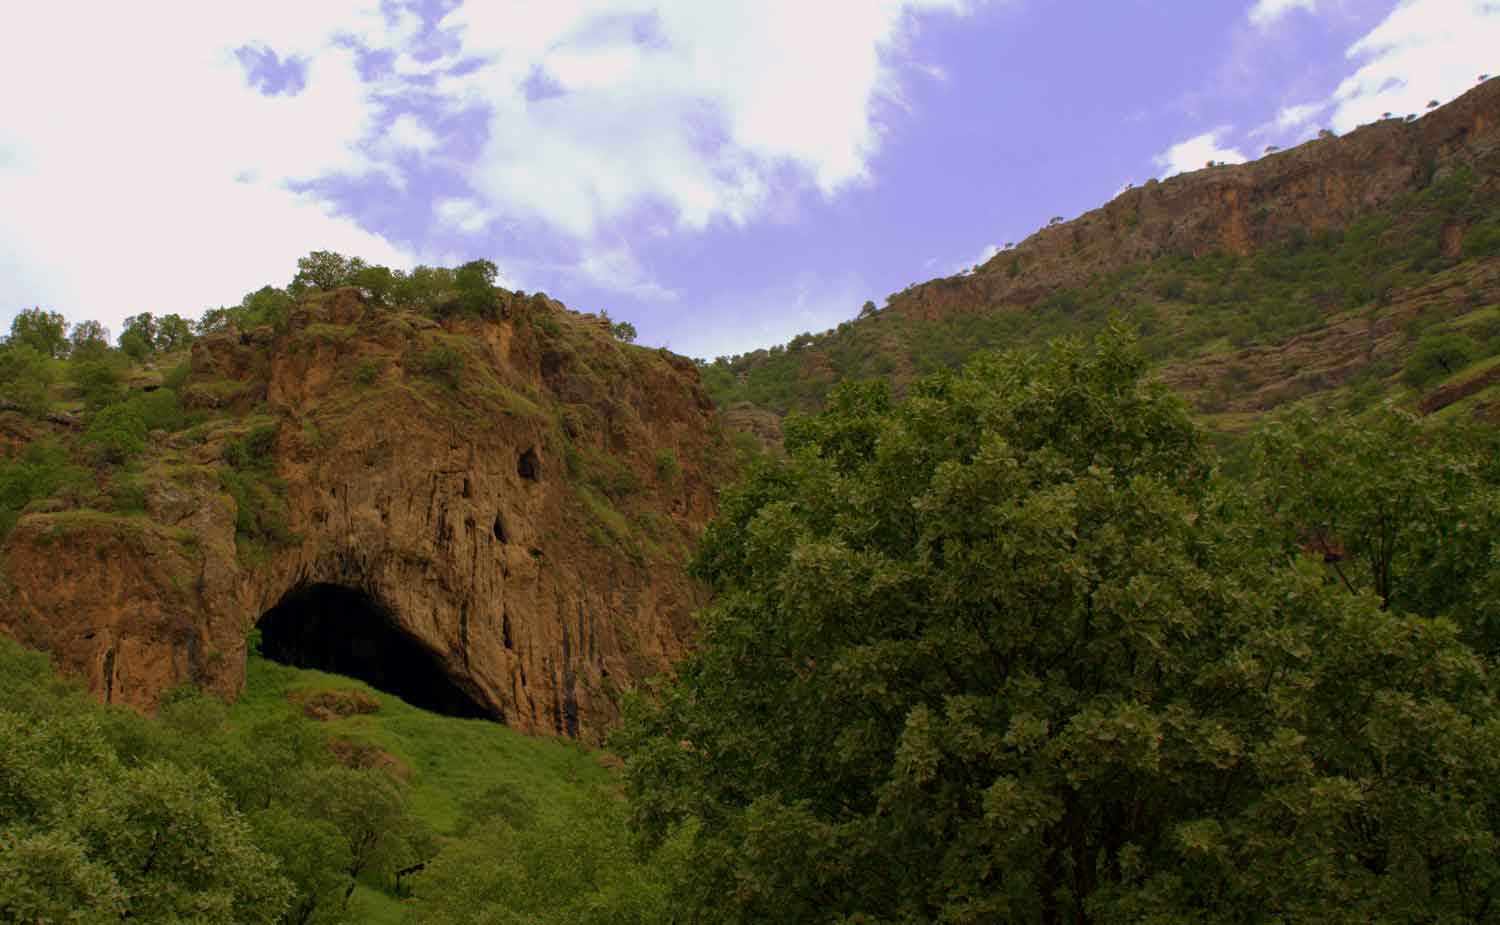 A cave opening in a rocky hill with green trees visible and a blue cloudy sky